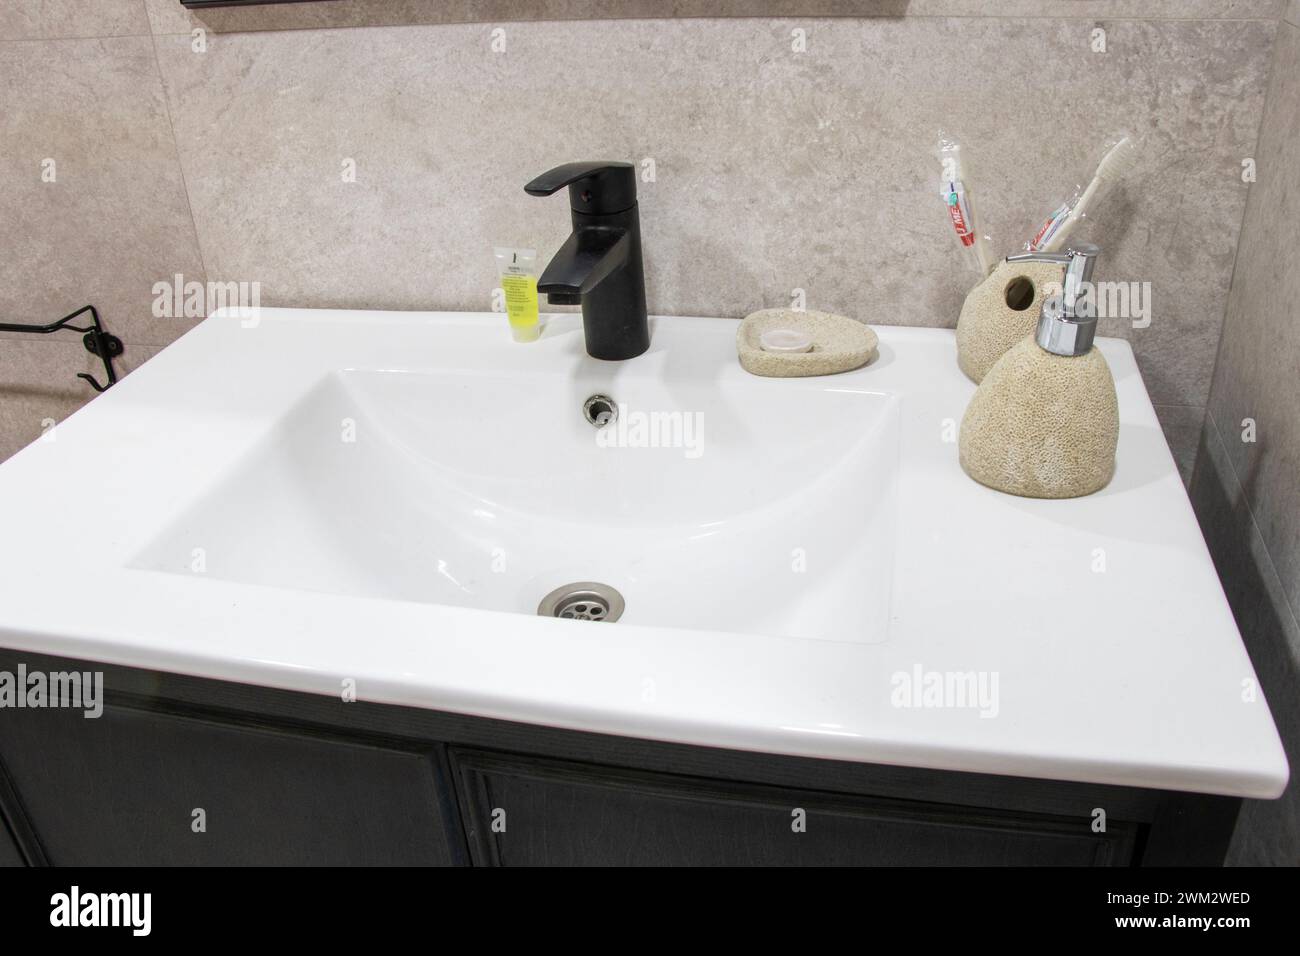 White sink with soap, sponges, and dispenser in a kitchen or bathroom Stock Photo